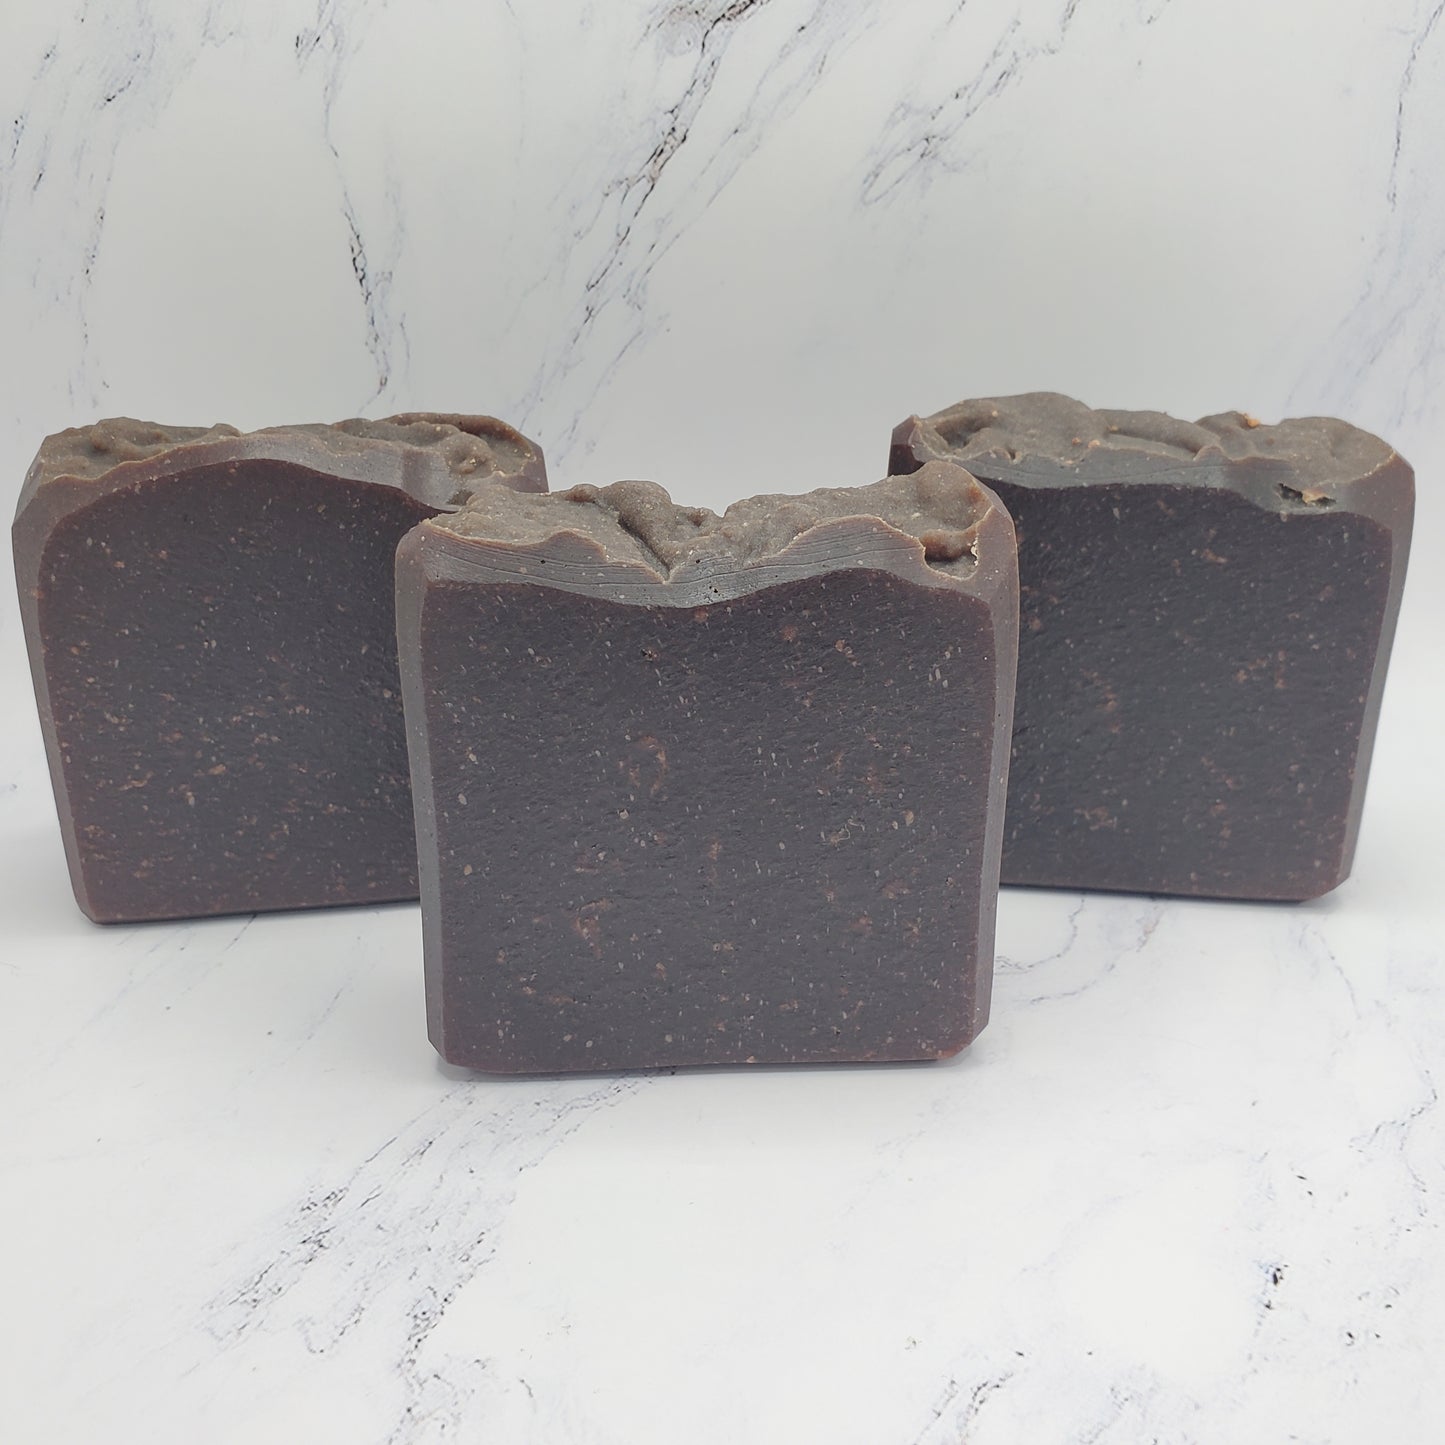 Milk & Cocoa Bar Soap with Patchouli, Vanilla, Clove, and Ylang Ylang Essential Oils